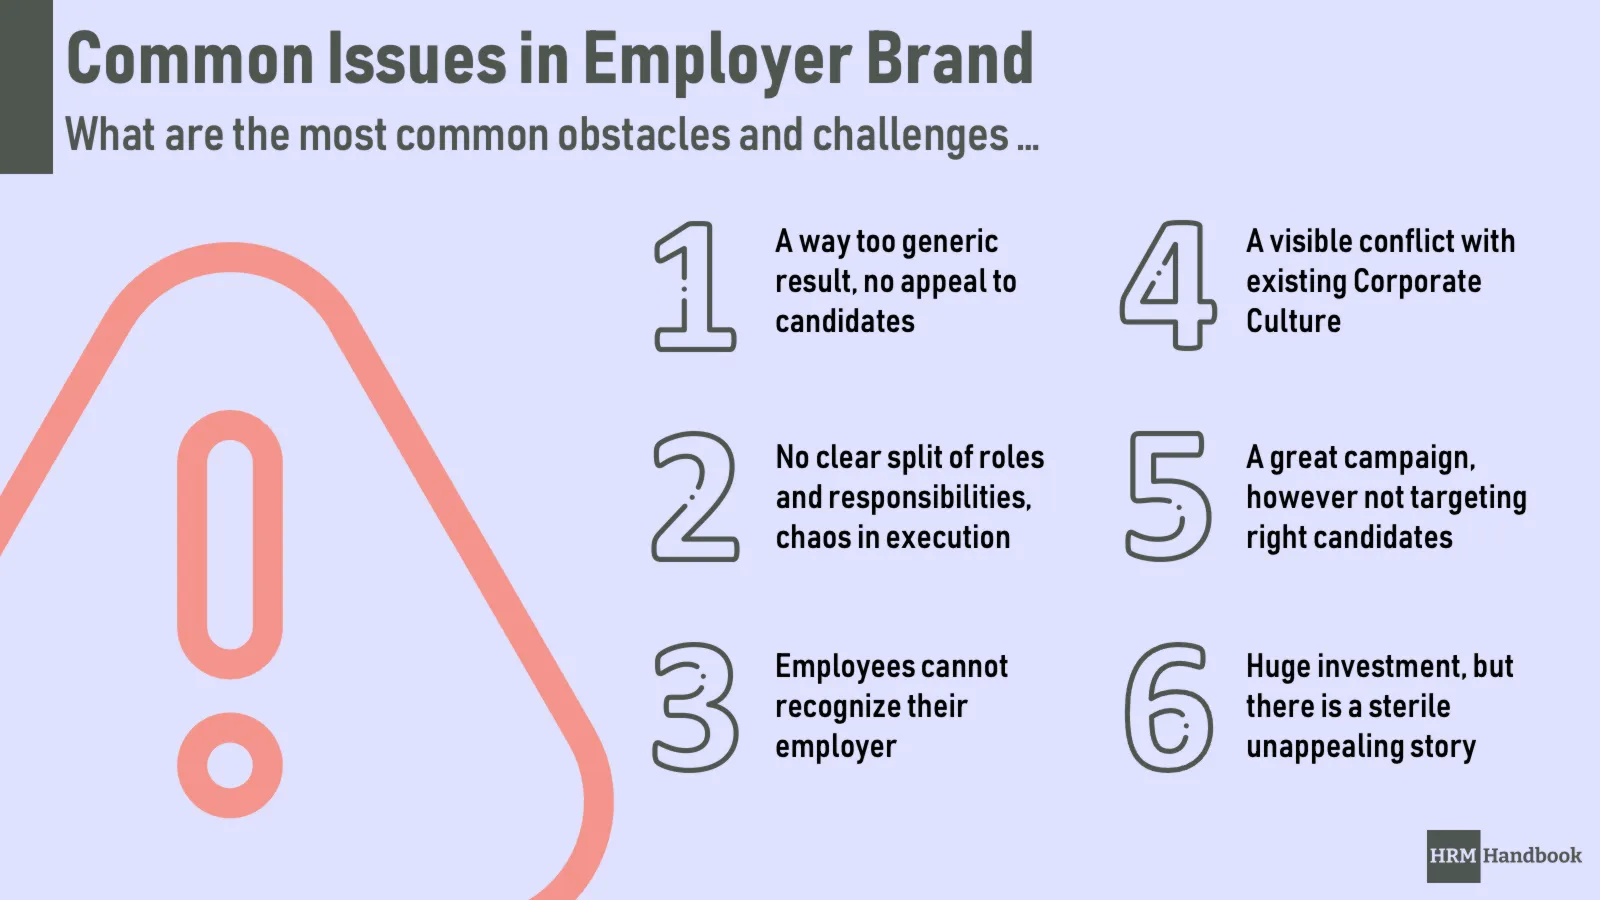 Most Common Issues in Employer Brand